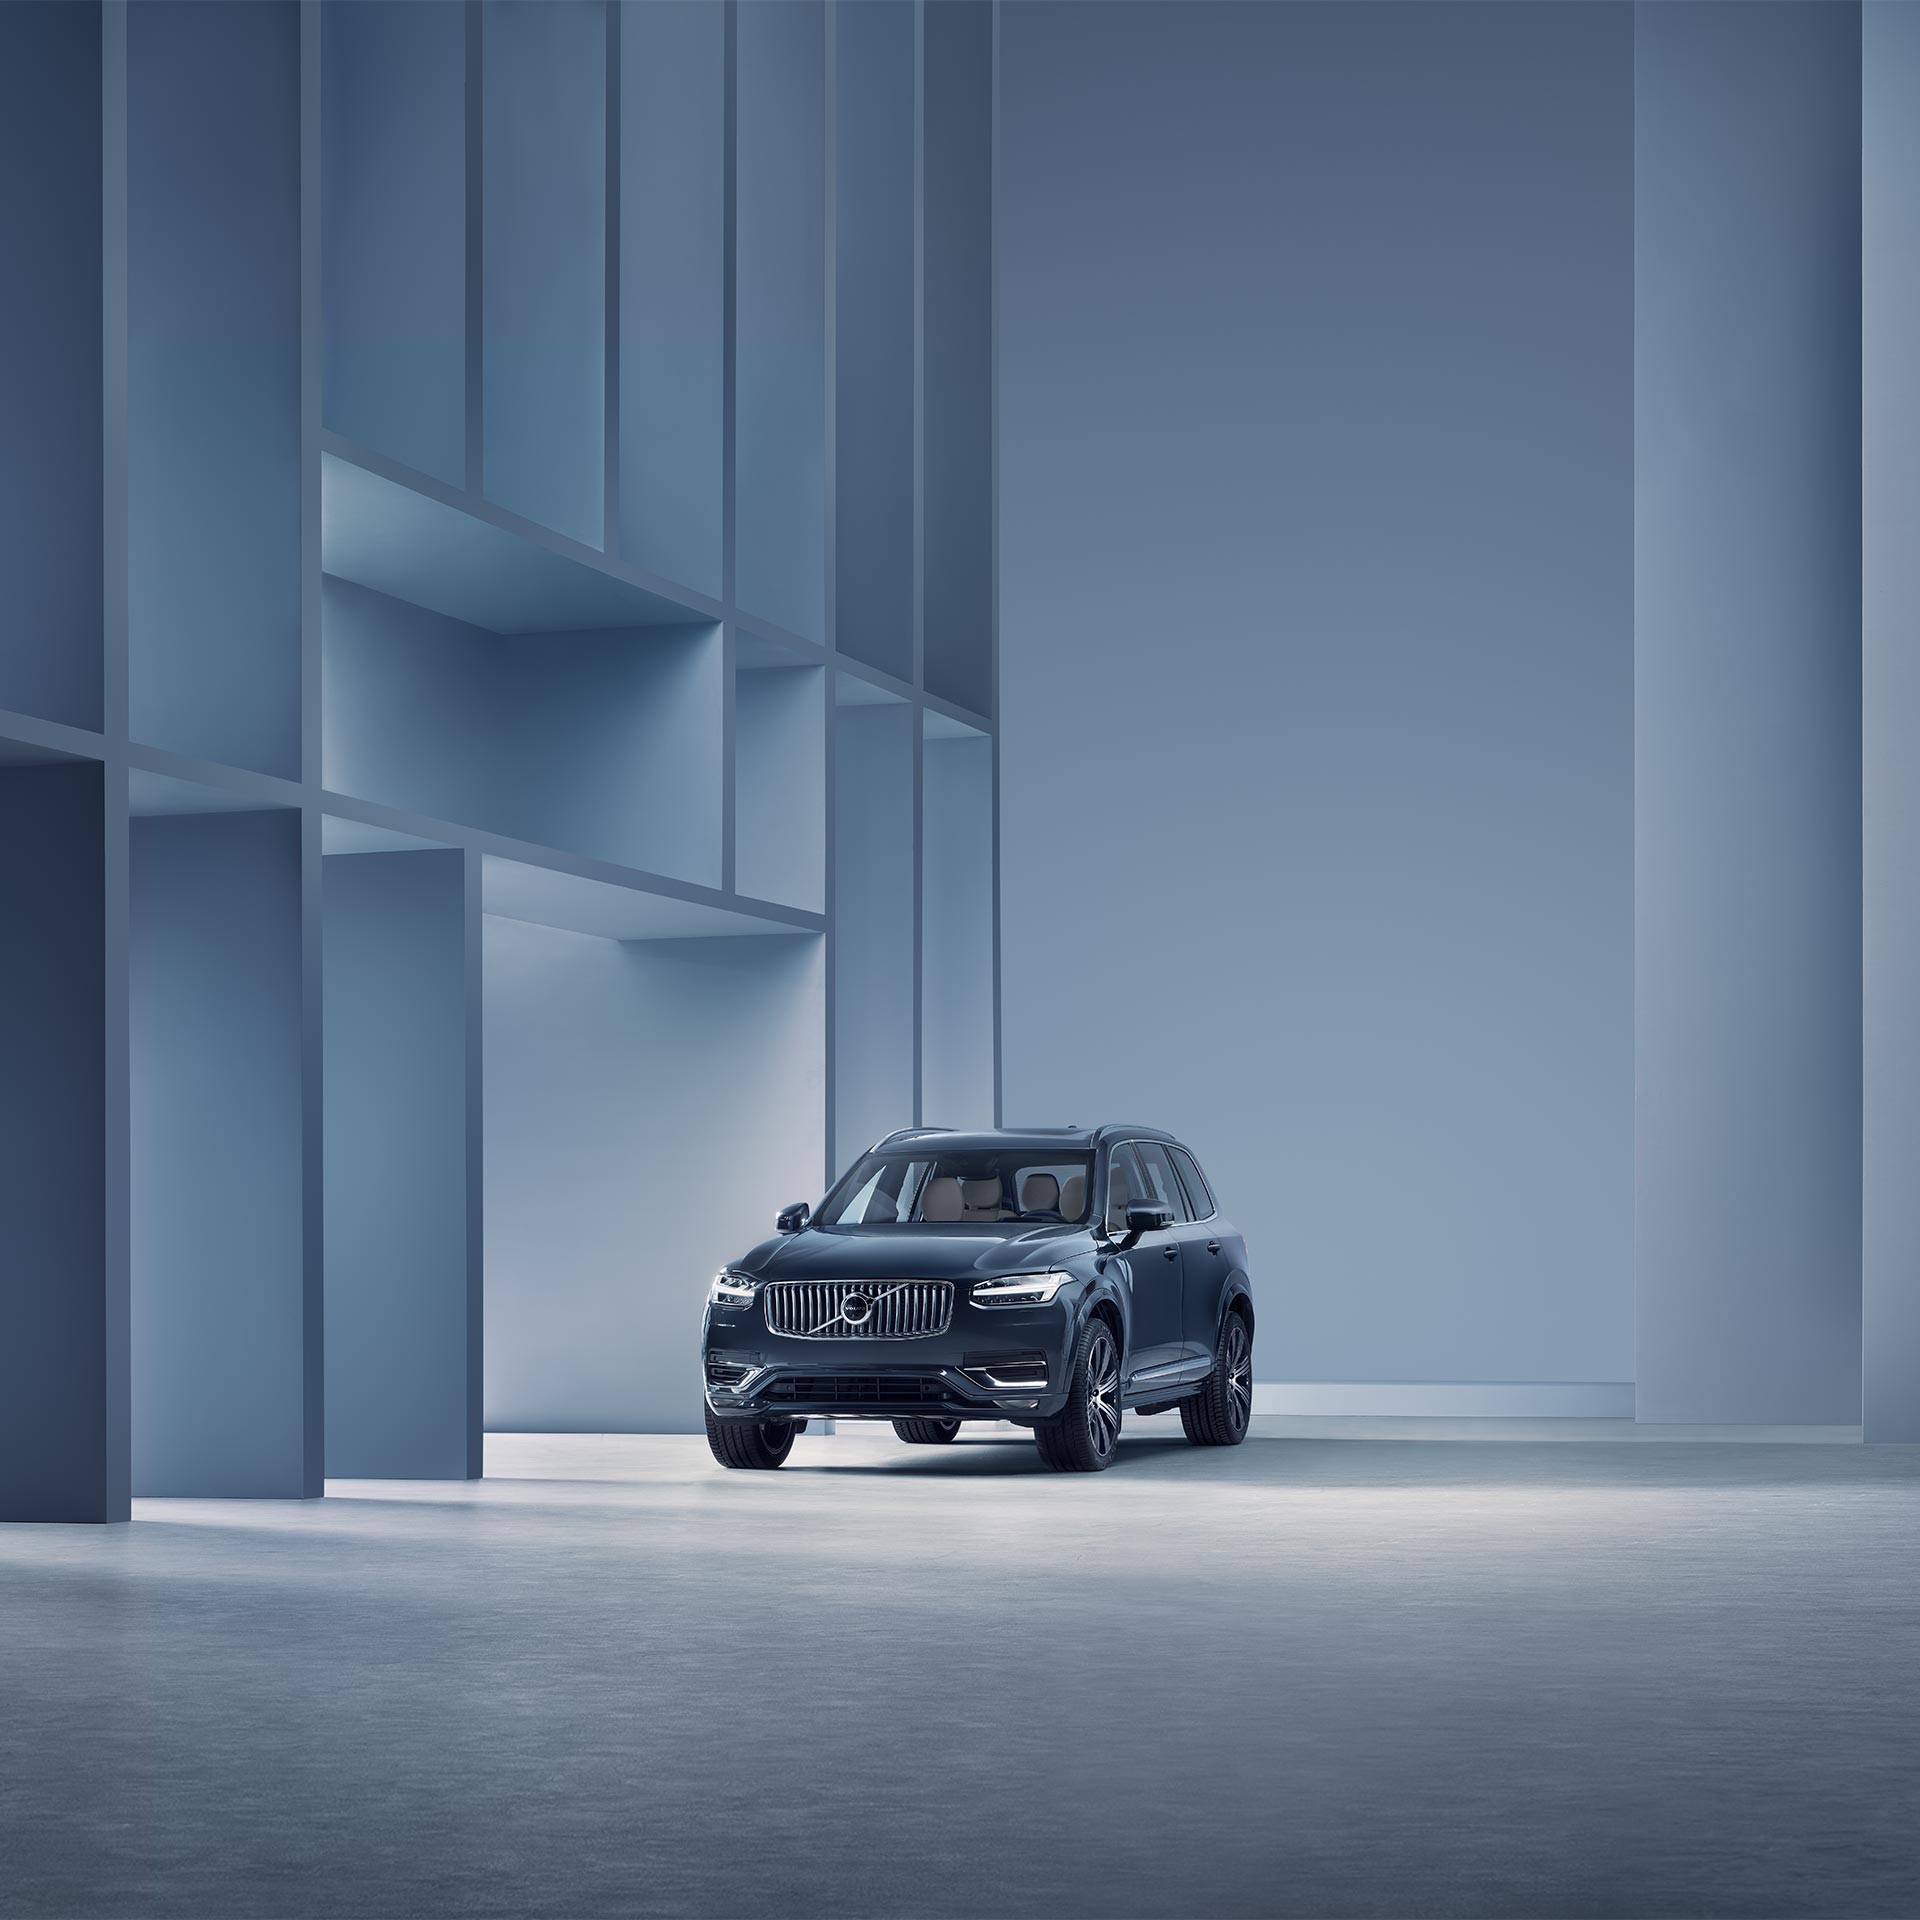 Style and comfort combined in the Volvo XC90 mild hybrid SUV.